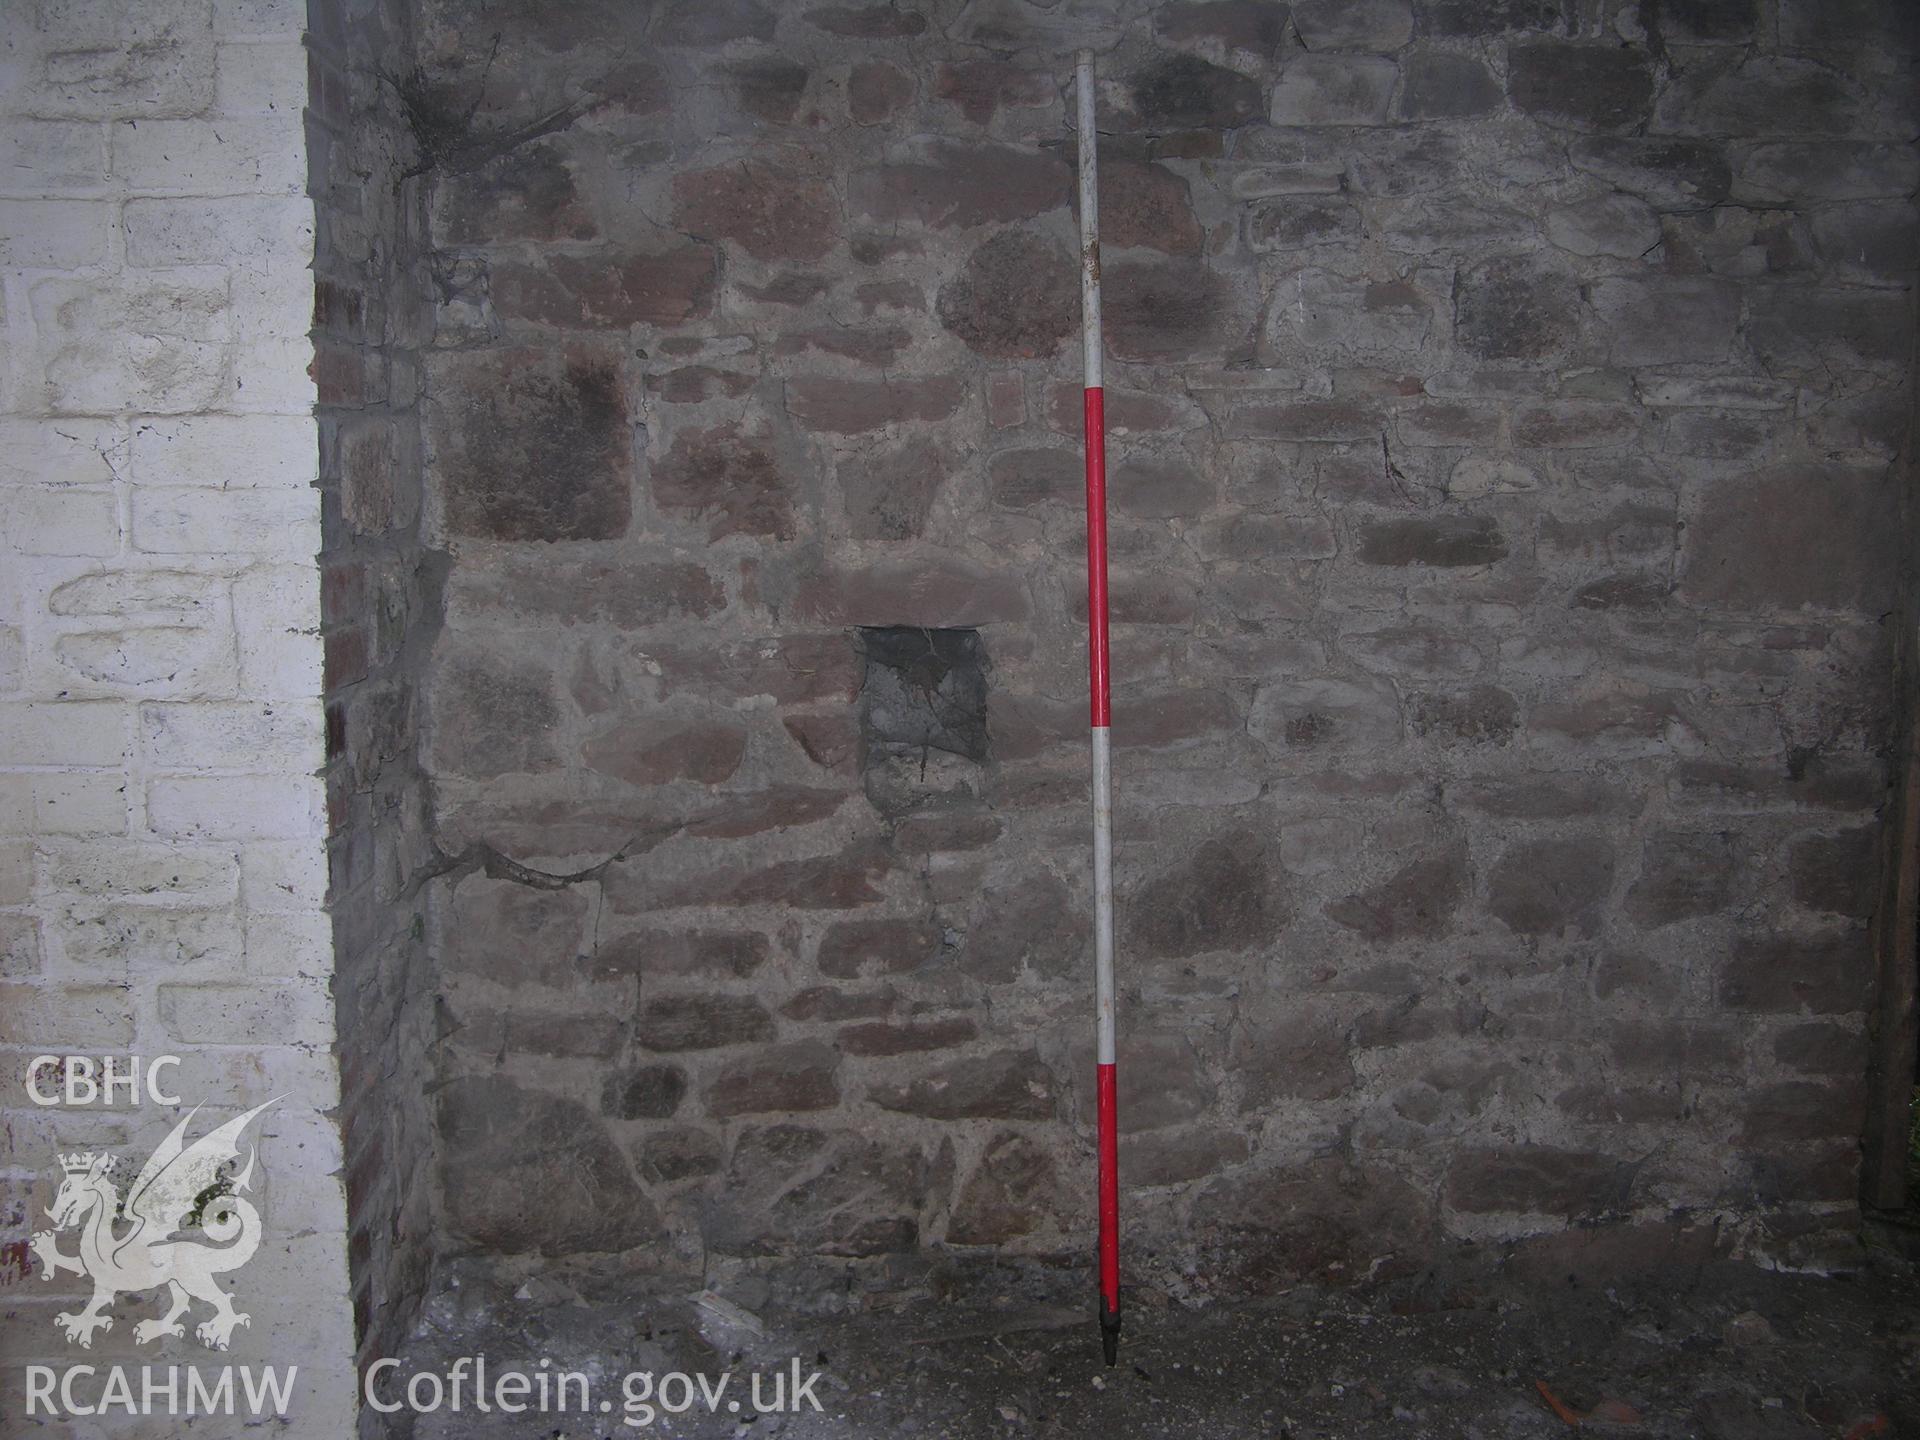 Digital photograph detailing an interior wall, from an Archaeological Building Recording of Hillside Barn, Llanvaches, Monmouthshire, which was conducted by Cambrian Archaeological Projects.